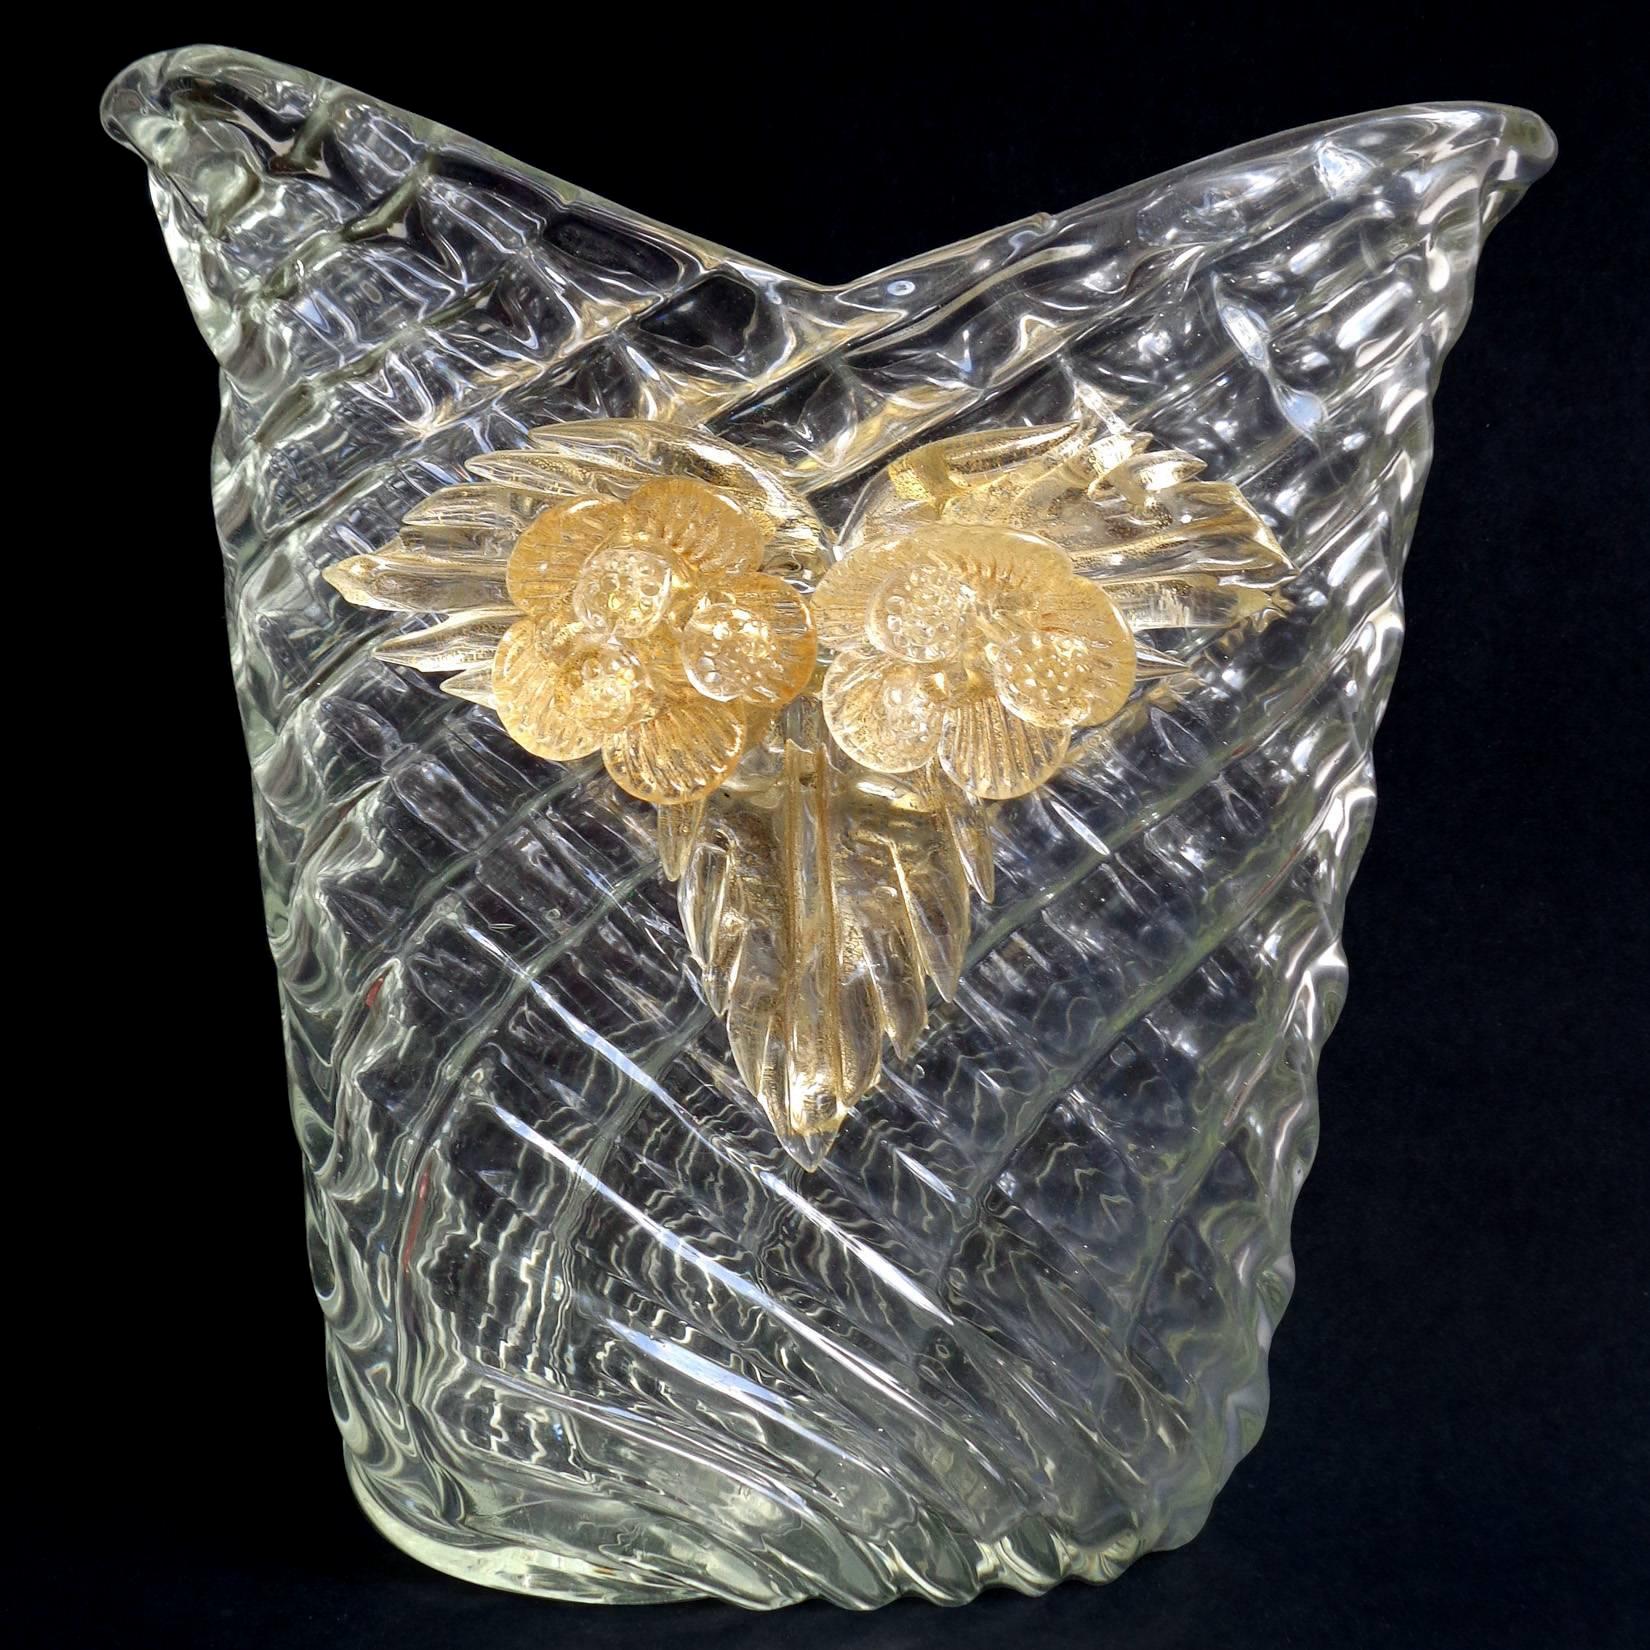 Gorgeous large Murano crystal clear with gold flowers and leafs Italian art glass quilted vase. Documented to designer Flavio Poli for Seguso Vetri d'Arte, circa 1949, in the 